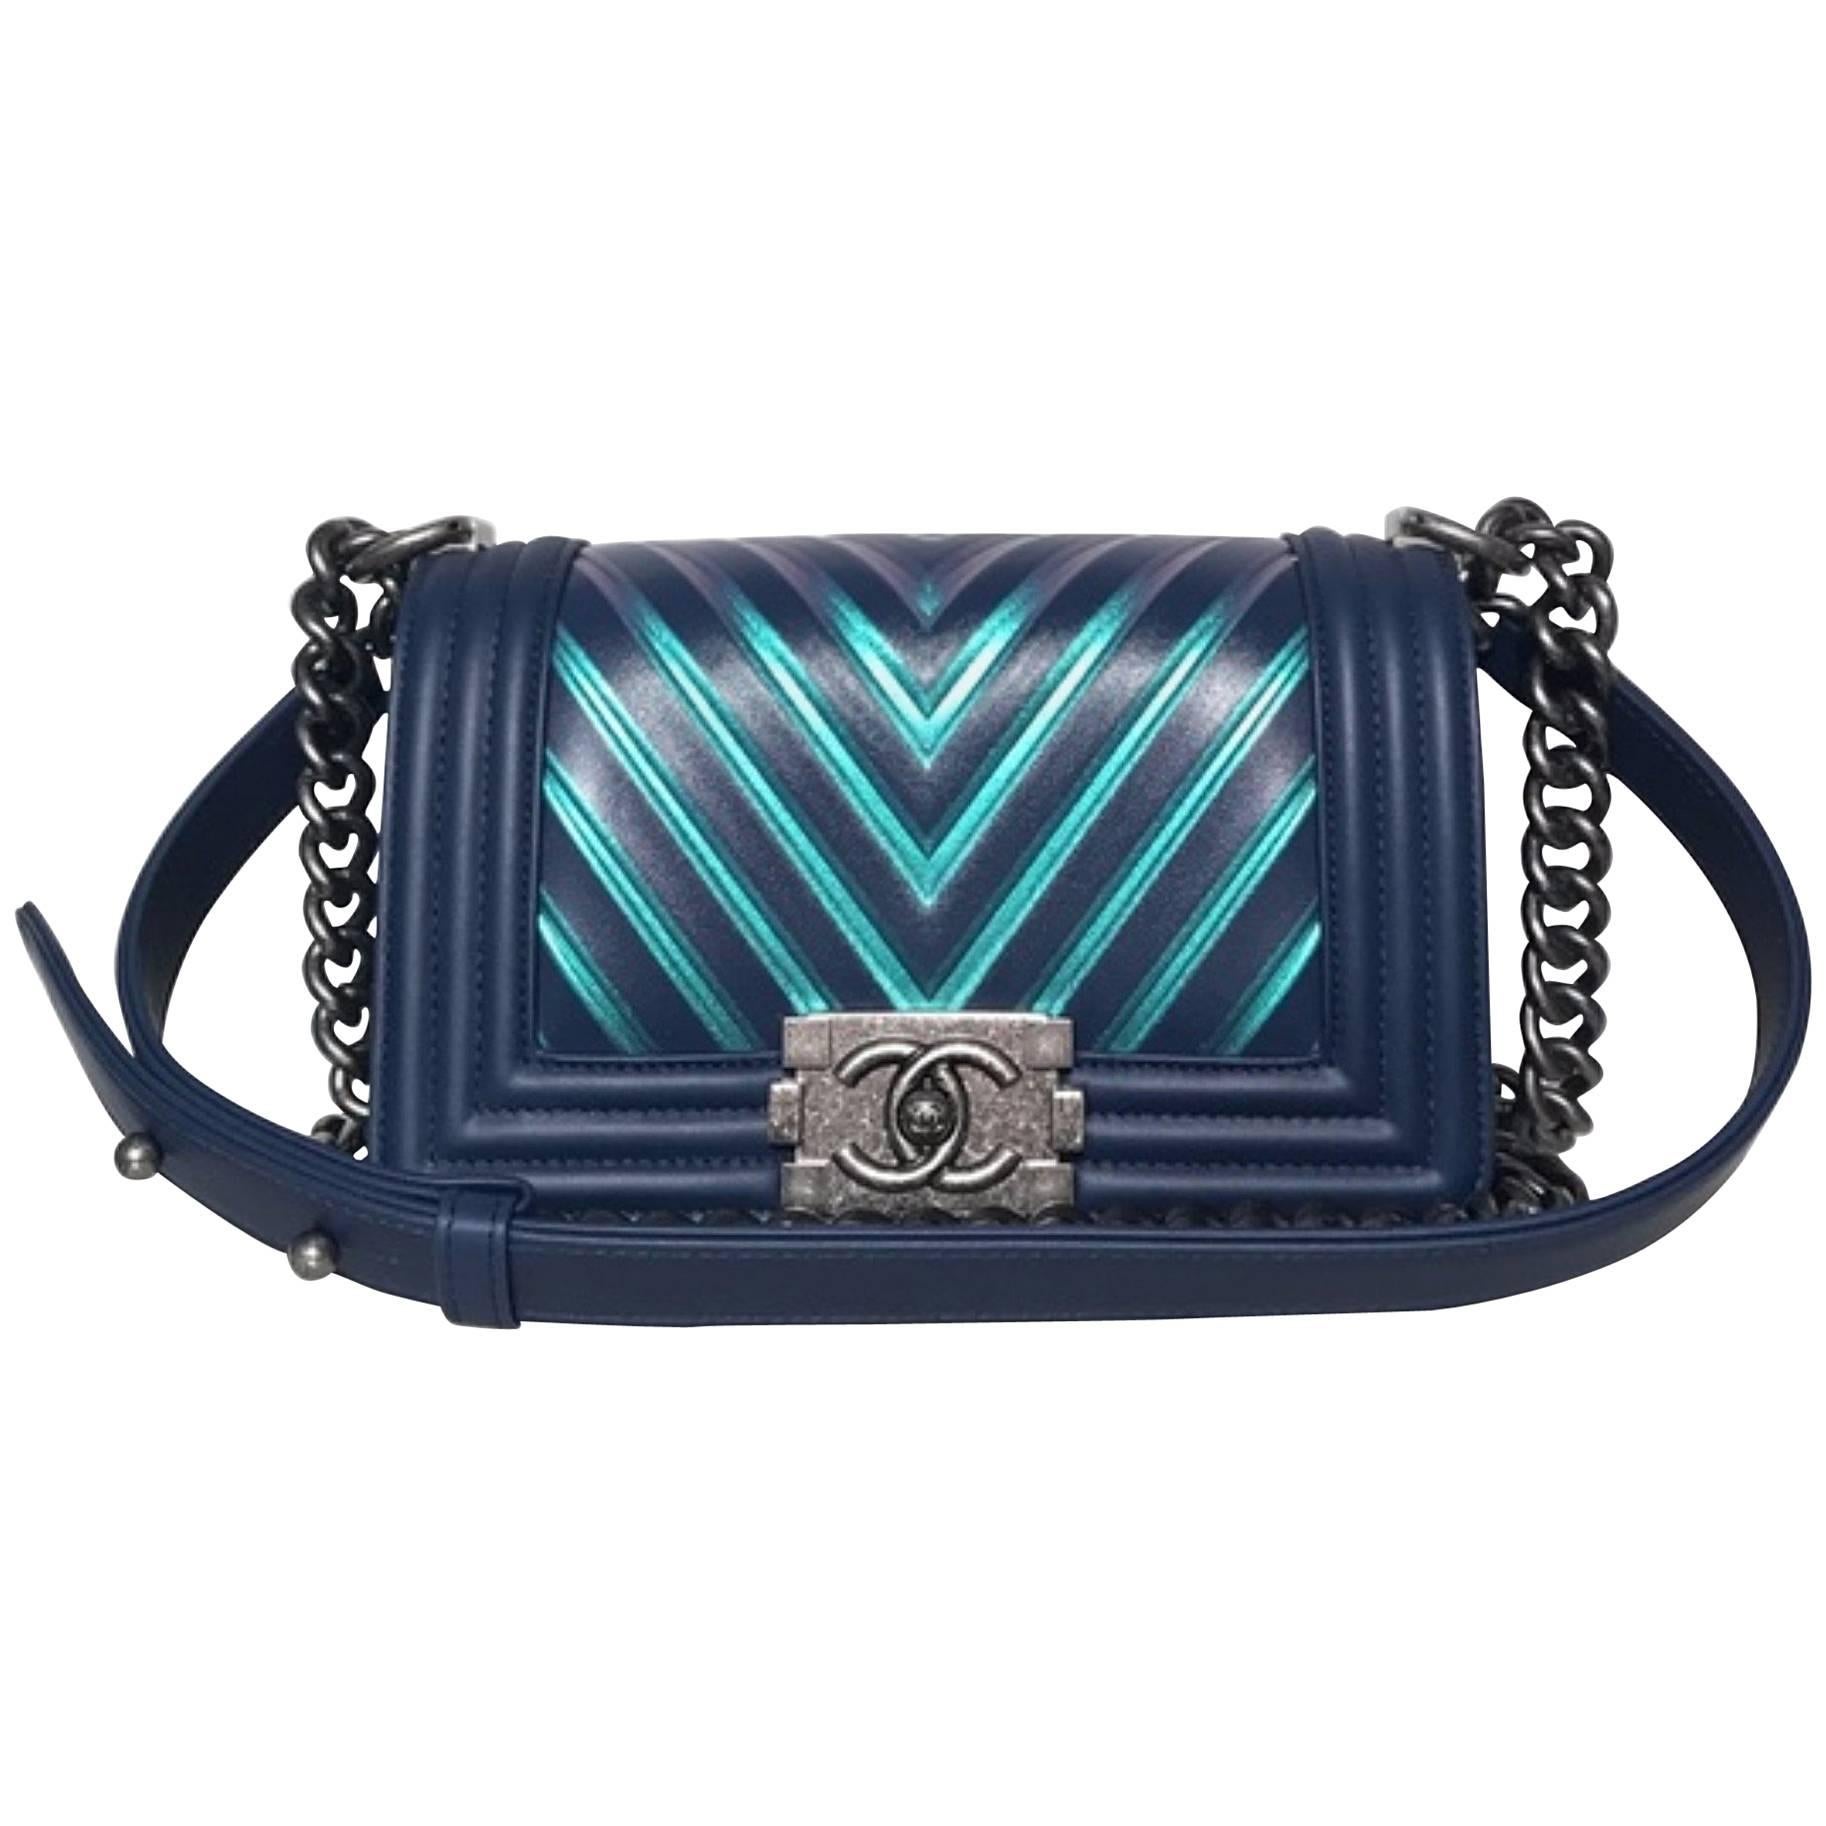 Chanel Painted Chevron Iridescent Small Bag (Blue, Size - Small) For Sale